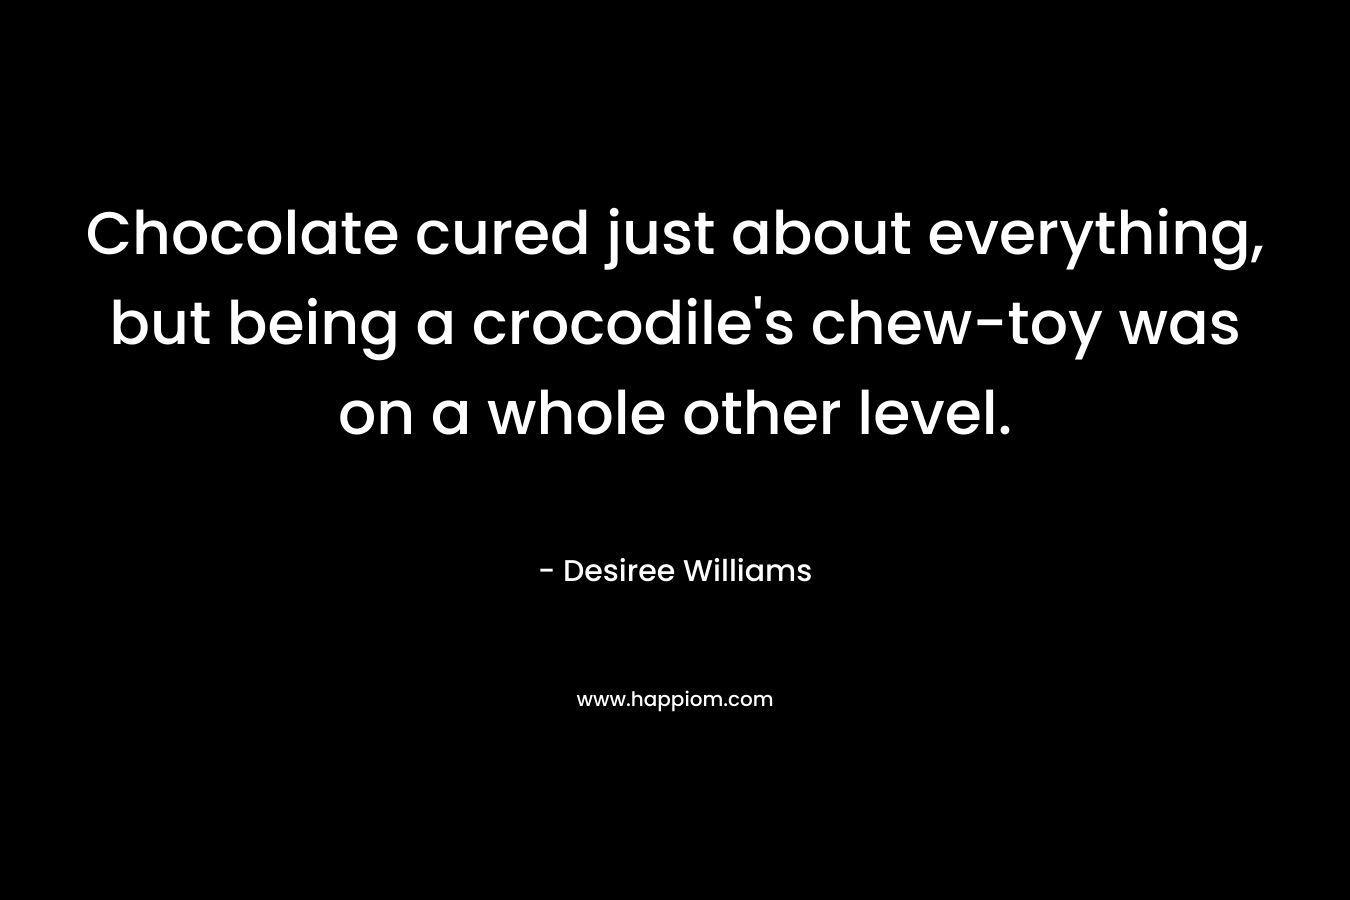 Chocolate cured just about everything, but being a crocodile’s chew-toy was on a whole other level. – Desiree Williams